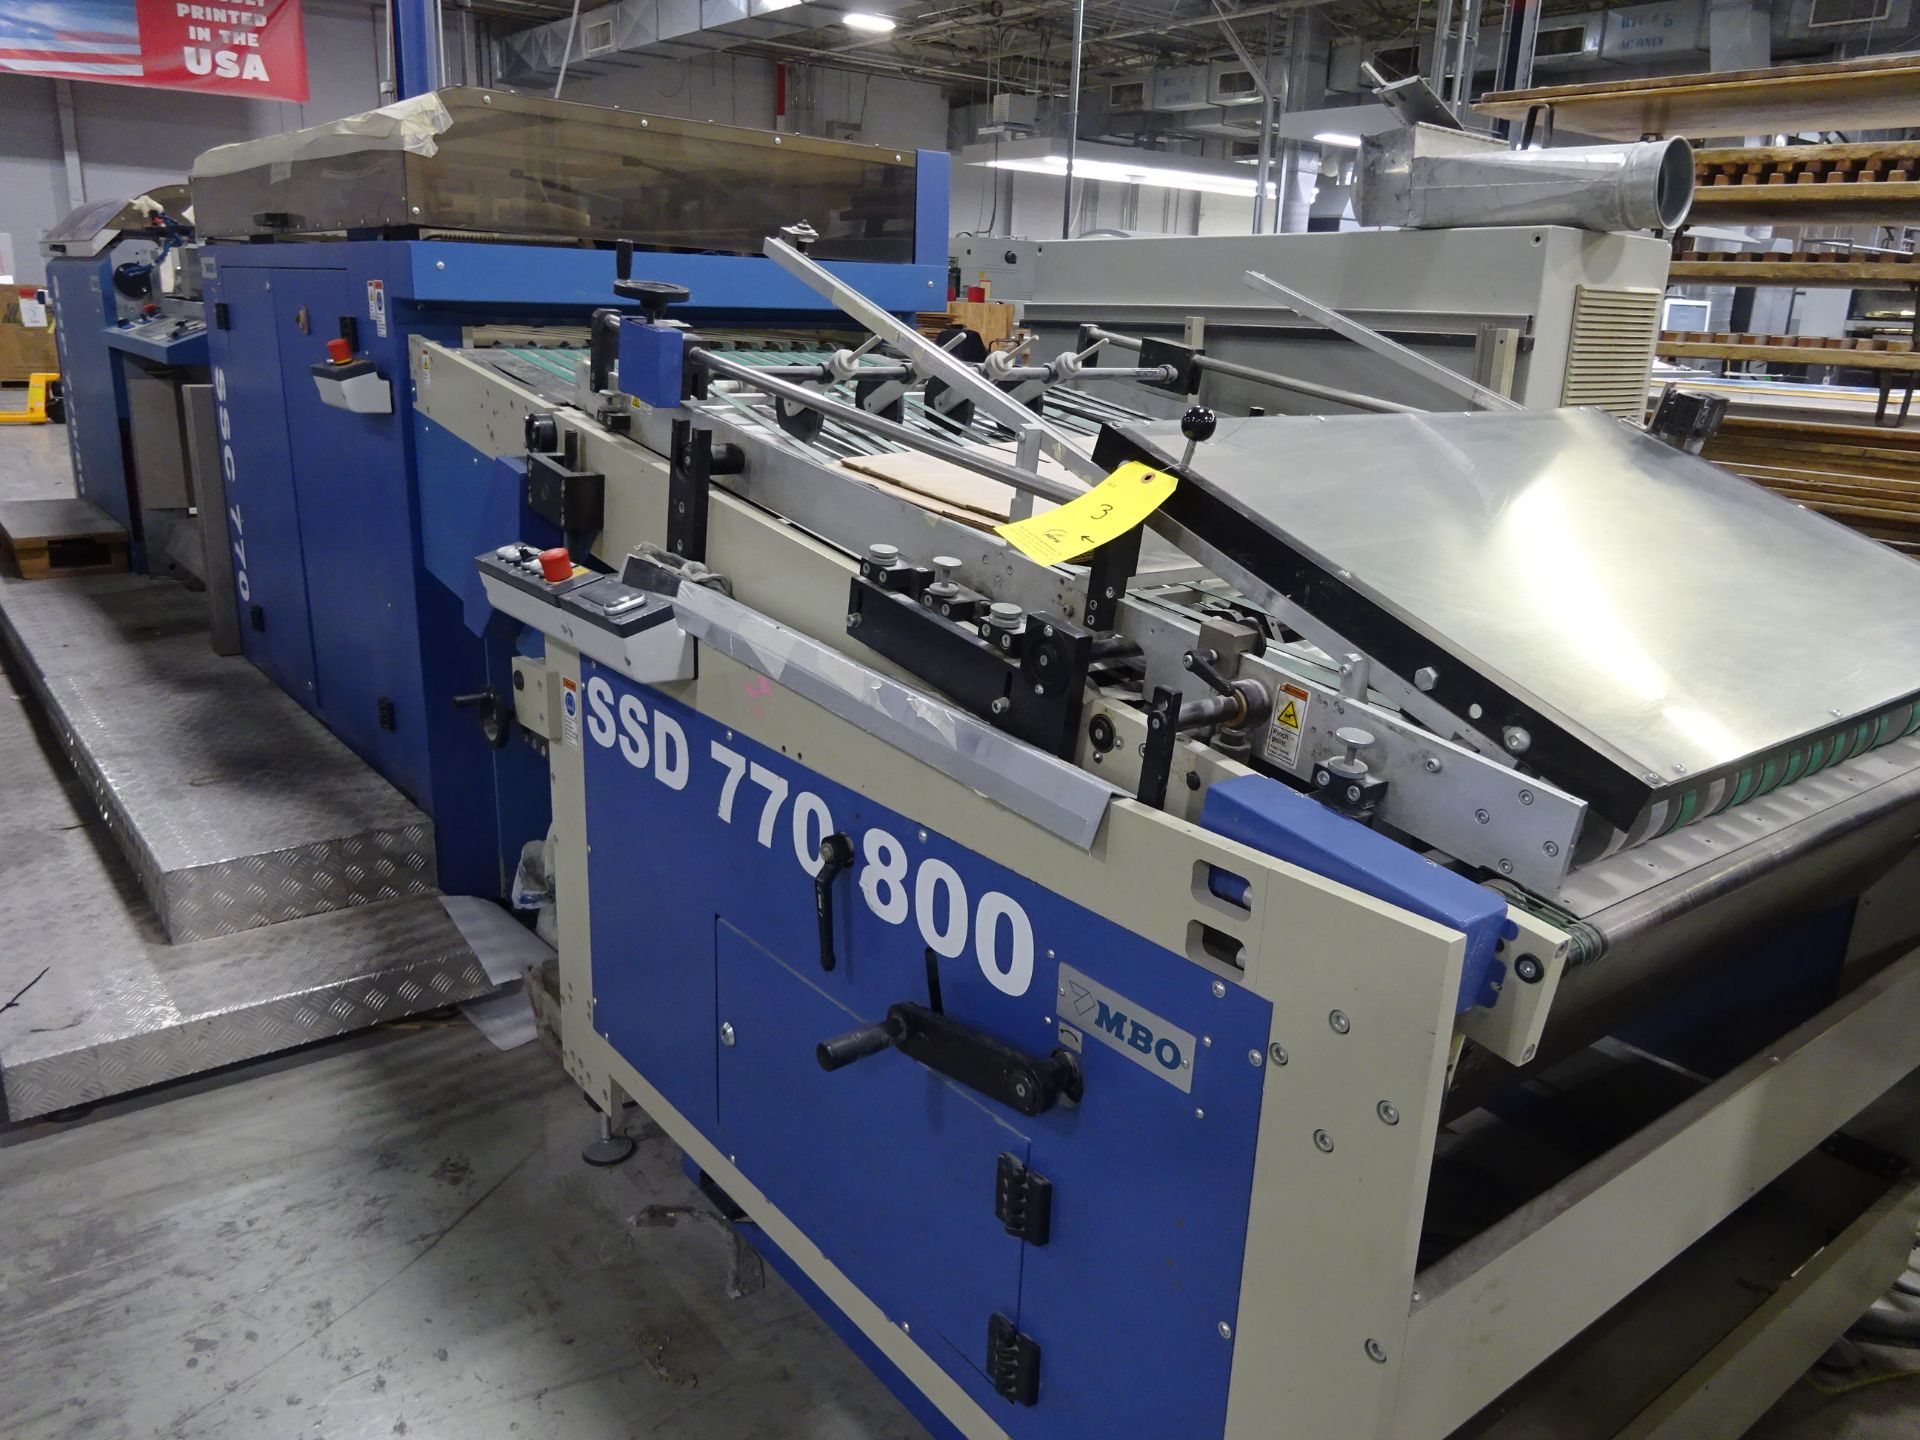 2012 MBO Sheet Stacking Section for Production Ink Jet Printers, Includes: EM770 Ejection Module,